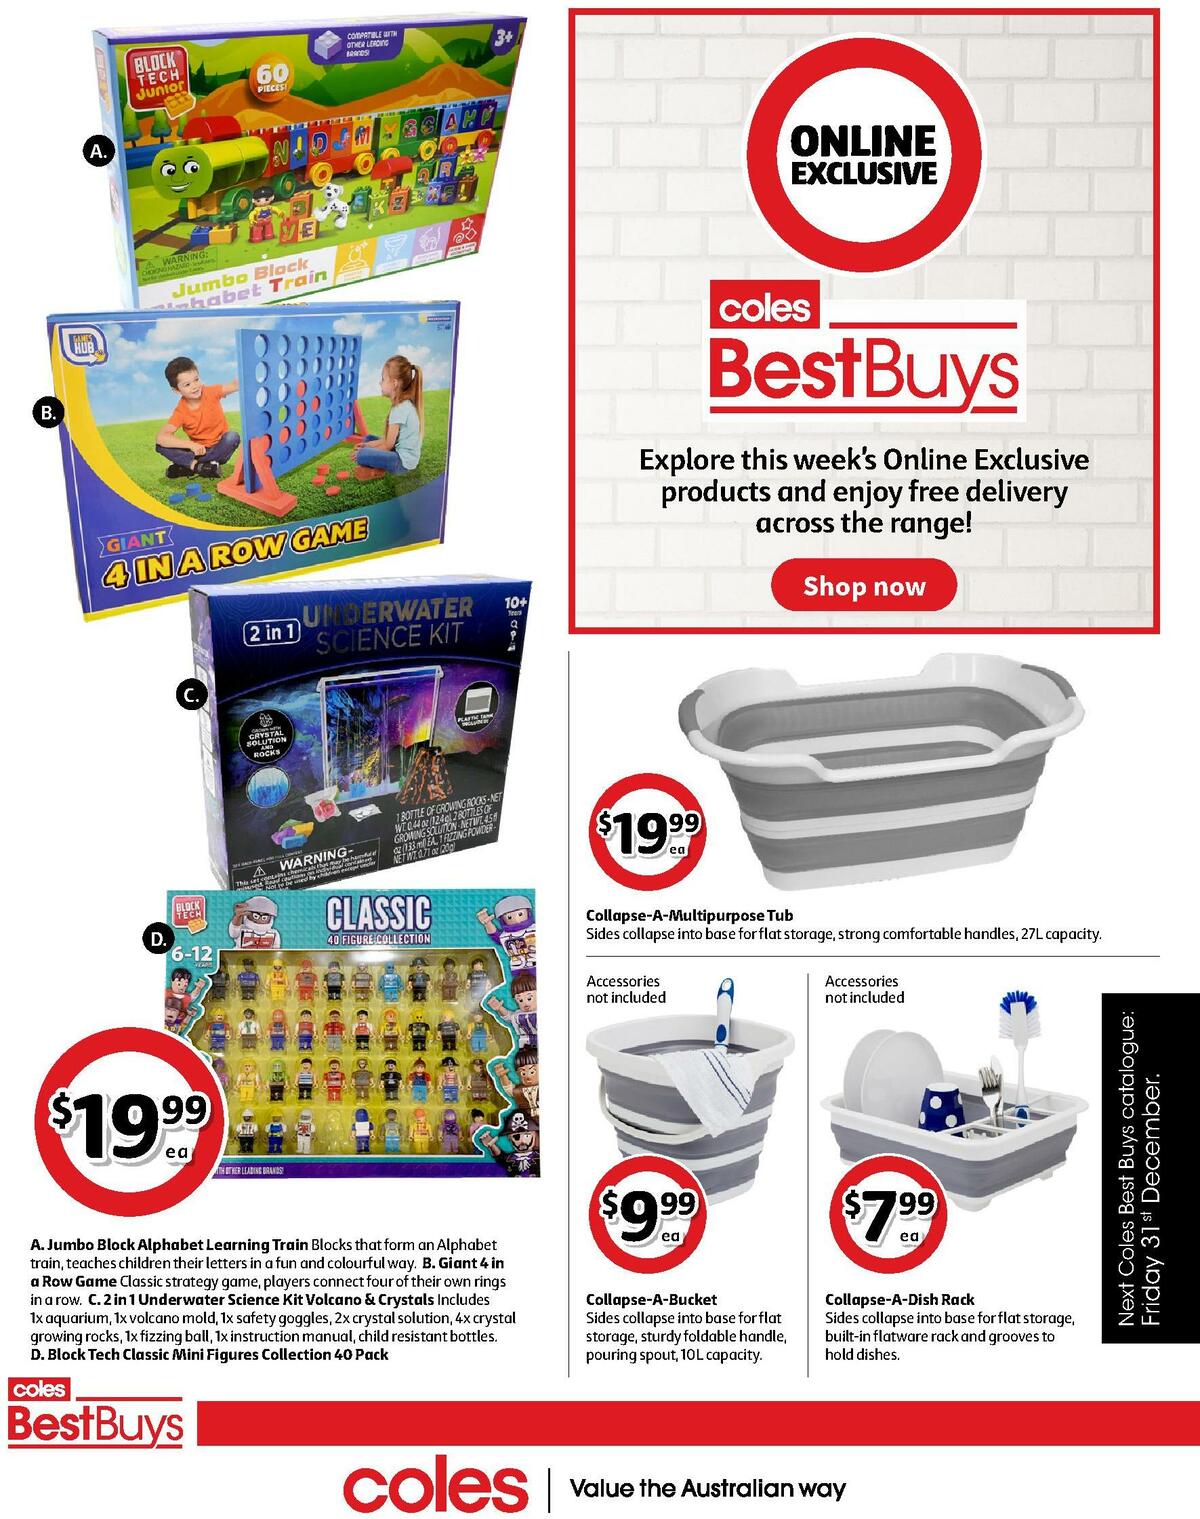 Coles Best Buys - Outdoor & Home Tech Catalogues from 17 December